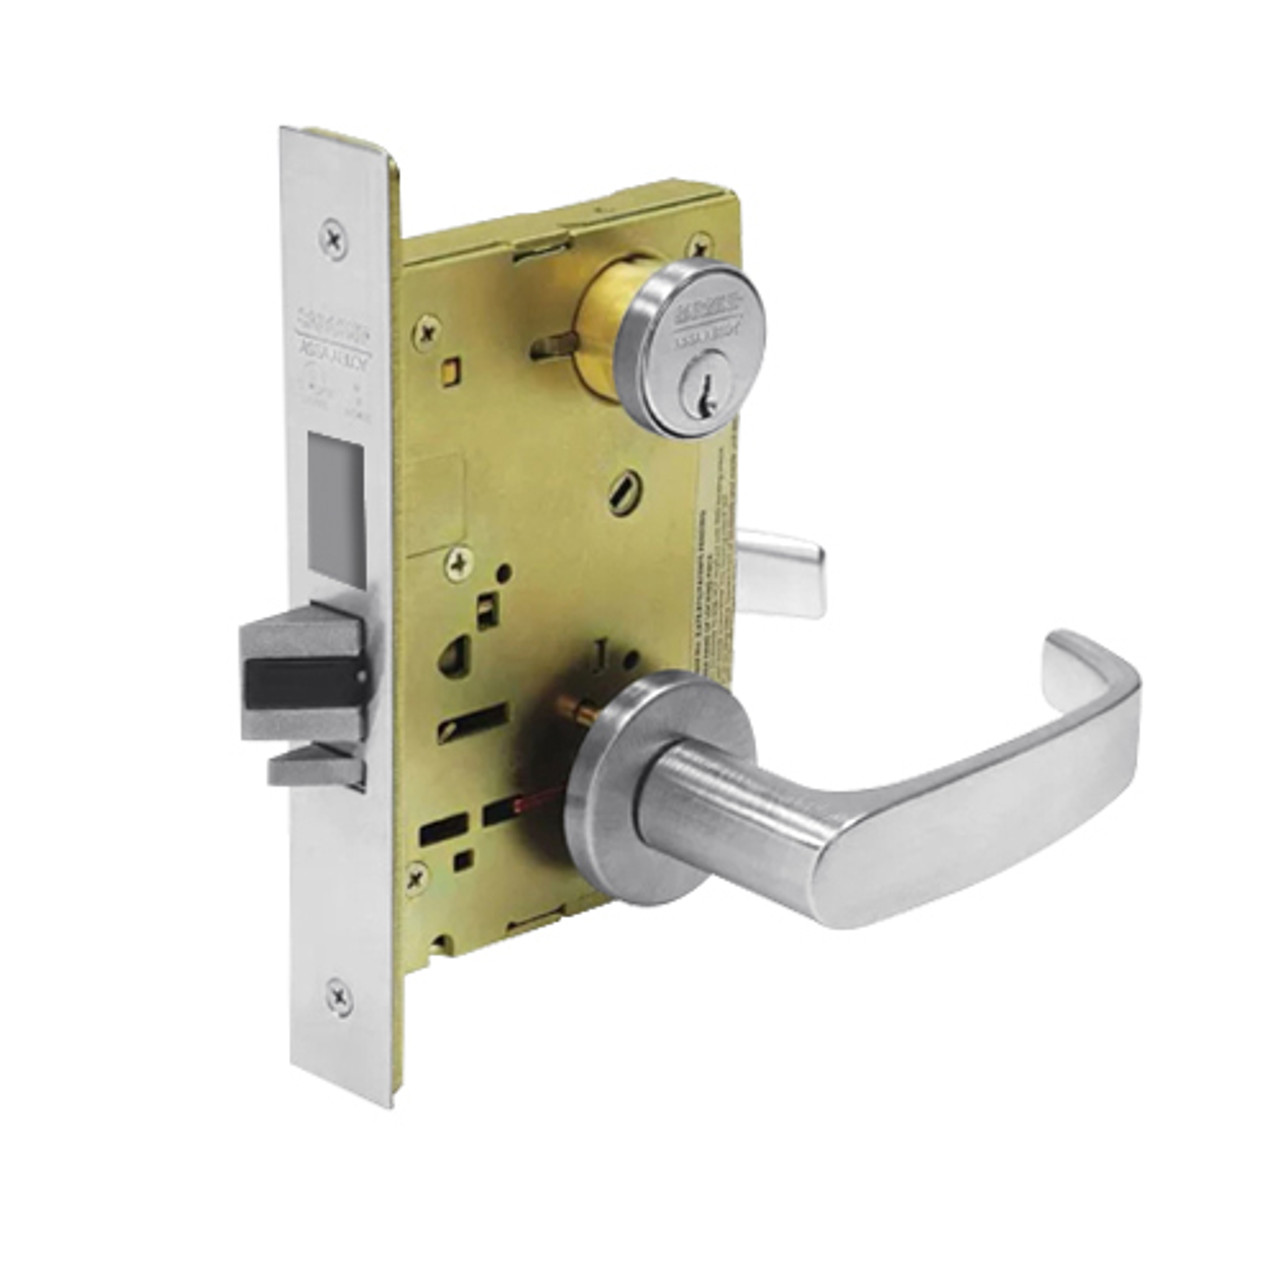 8243-LNL-26 Sargent 8200 Series Apartment Corridor Mortise Lock with LNL Lever Trim and Deadbolt in Bright Chrome